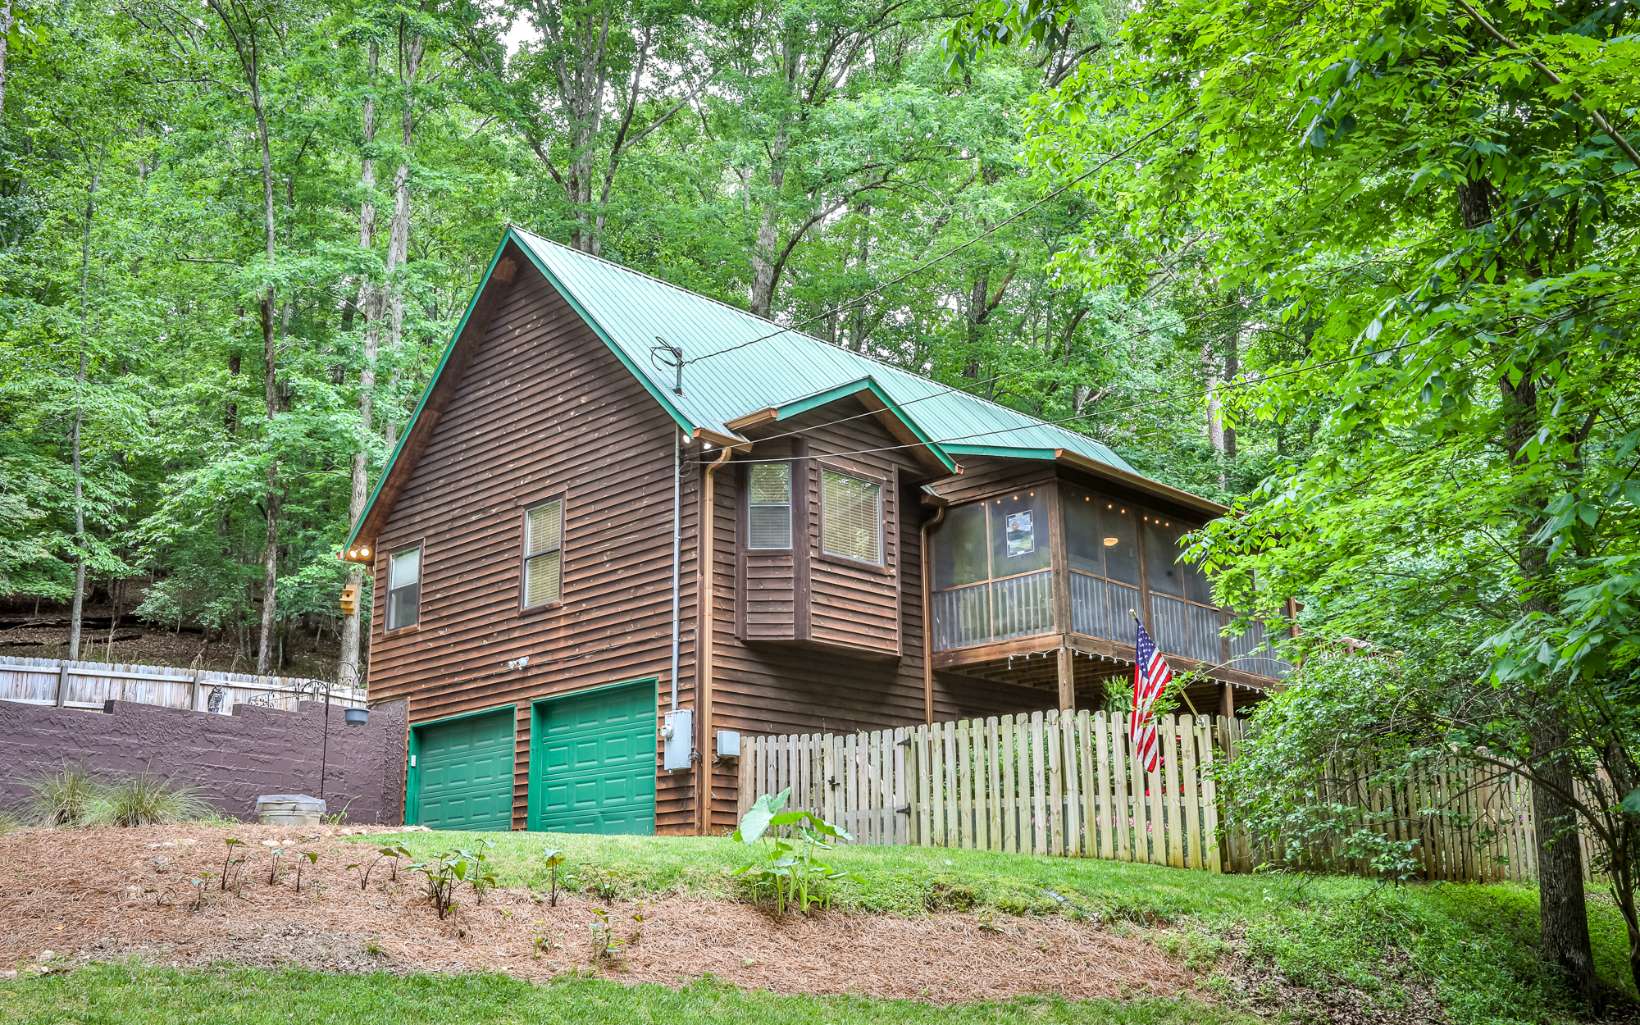 Come to a Tree House Cabin situated near the Coosawattee River, close enough to enjoy river sounds, a beautiful garden, birds chirping, all as you relax on a roomy screened in porch. This 3/3 features, Cathderal Ceilings, Pine floors, Stone Fireplace, granite Kitchen counters, gas range Large pantry and Split bedroom plan on the Main. A Roomy loft provides extra living, while the Spacious Master Bedroom features a walk in closet, jetted tub and double vanities. The terrace level has a bedroom/full bath, and another room for a 4th bedroom, studio, or workspace. Lower level also features a floral inspired patio w/ Fenced in area for pets and a gardening area ready for your inspiration. Top this off w/ a 2 car garage, Plenty of parking, outside fire pit, all paved roads, easy access, the amenities of Coosawattee River Resort, and it is the perfect Fit! Owners are Motivated!